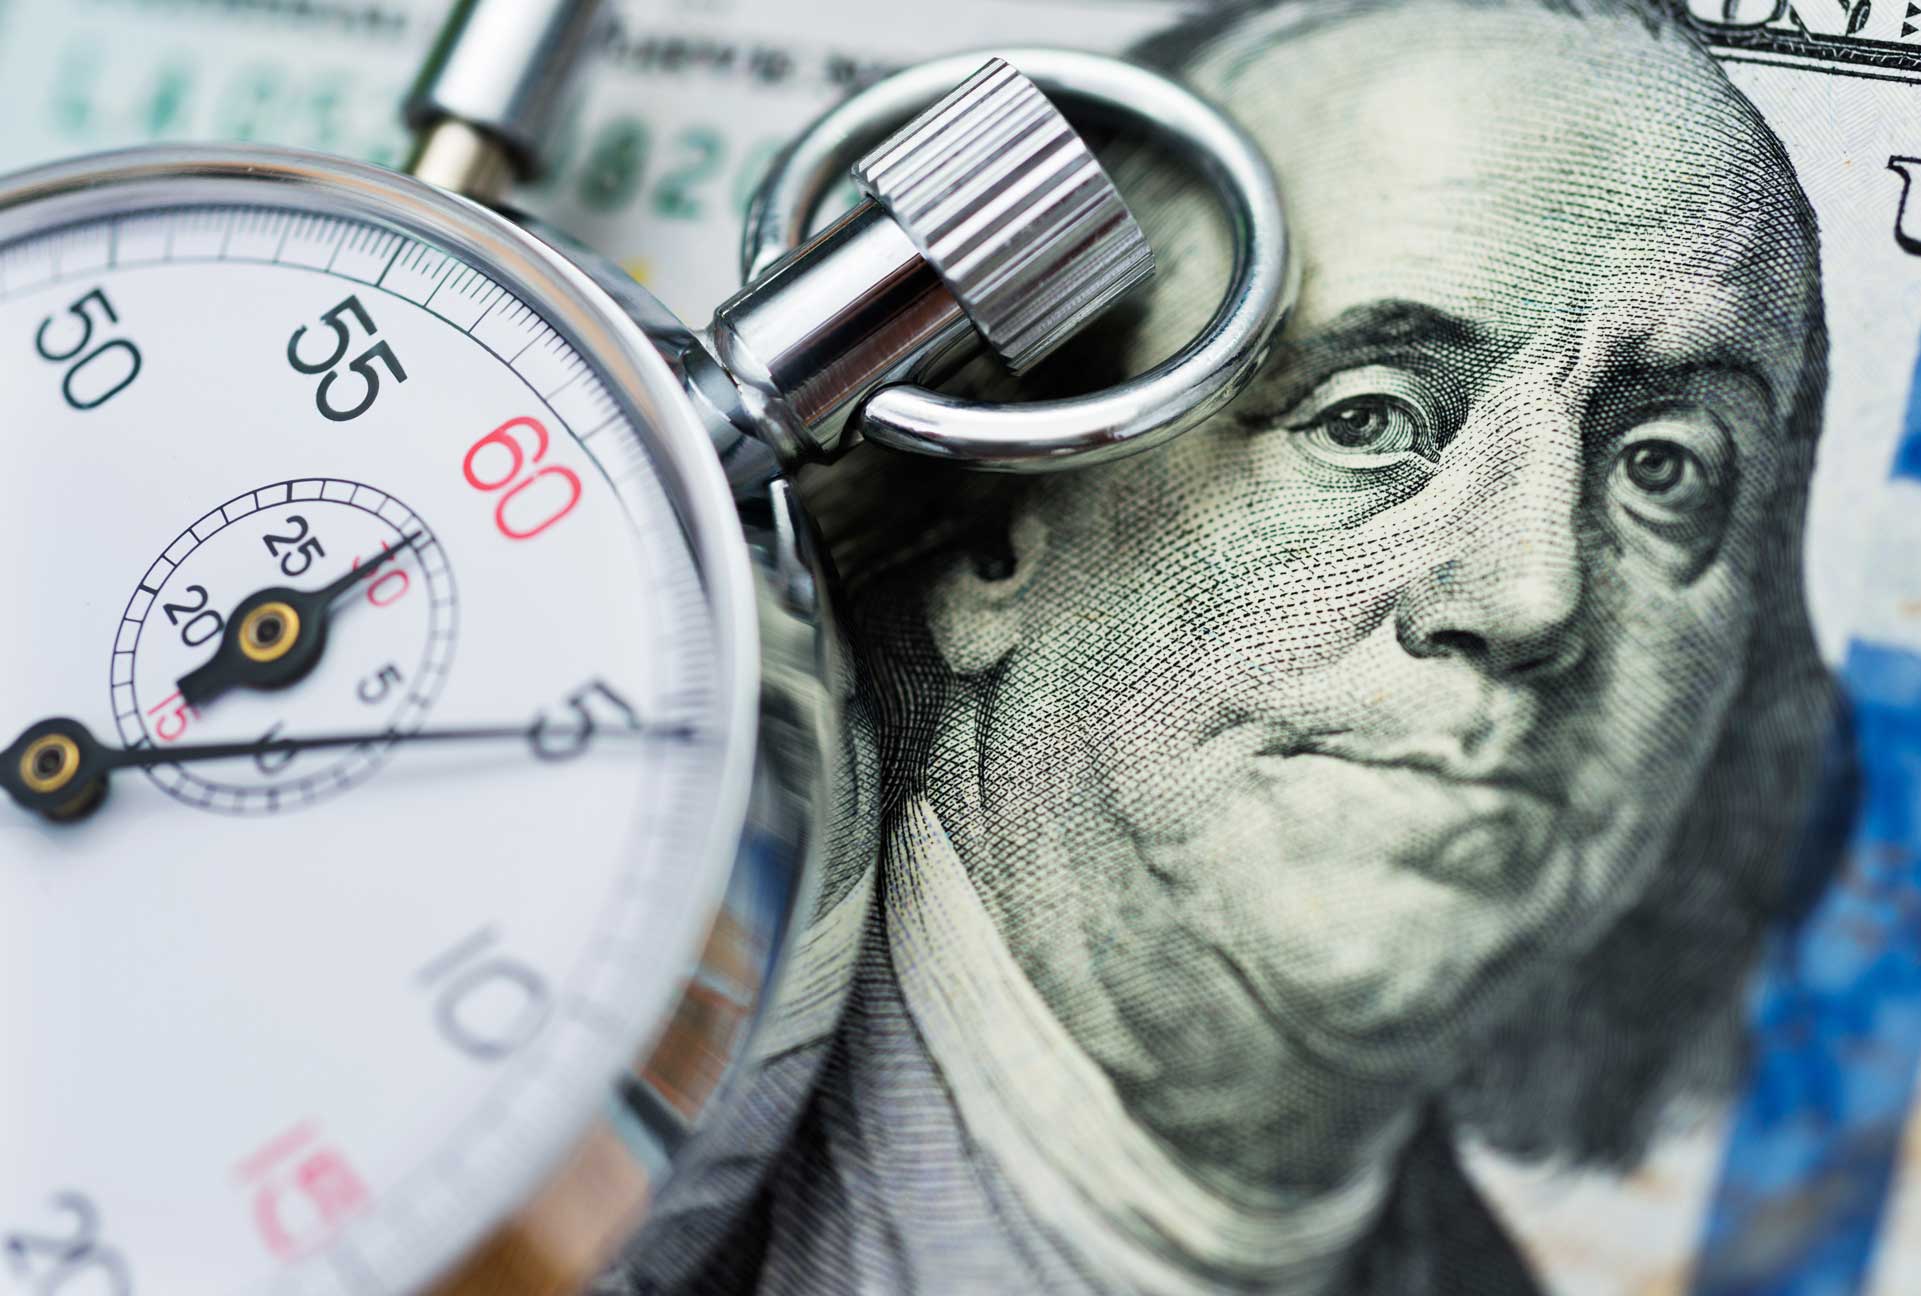 The Death of the Billable Hour — Long Forecast, But Refusing to Go Away